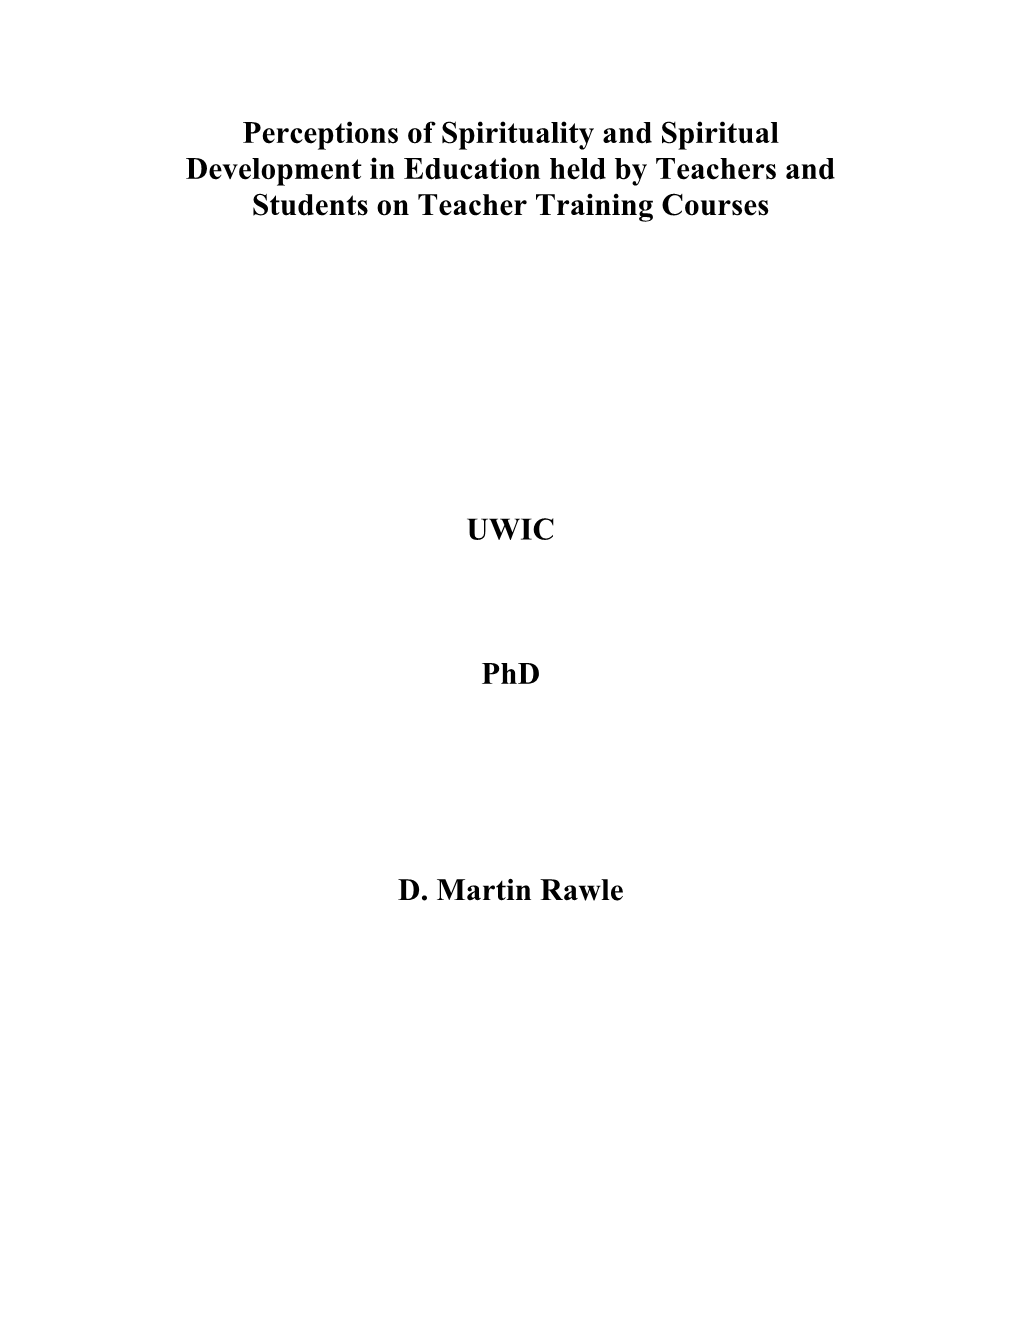 Perceptions of Spirituality and Spiritual Development in Education Held by Teachers and Students on Teacher Training Courses